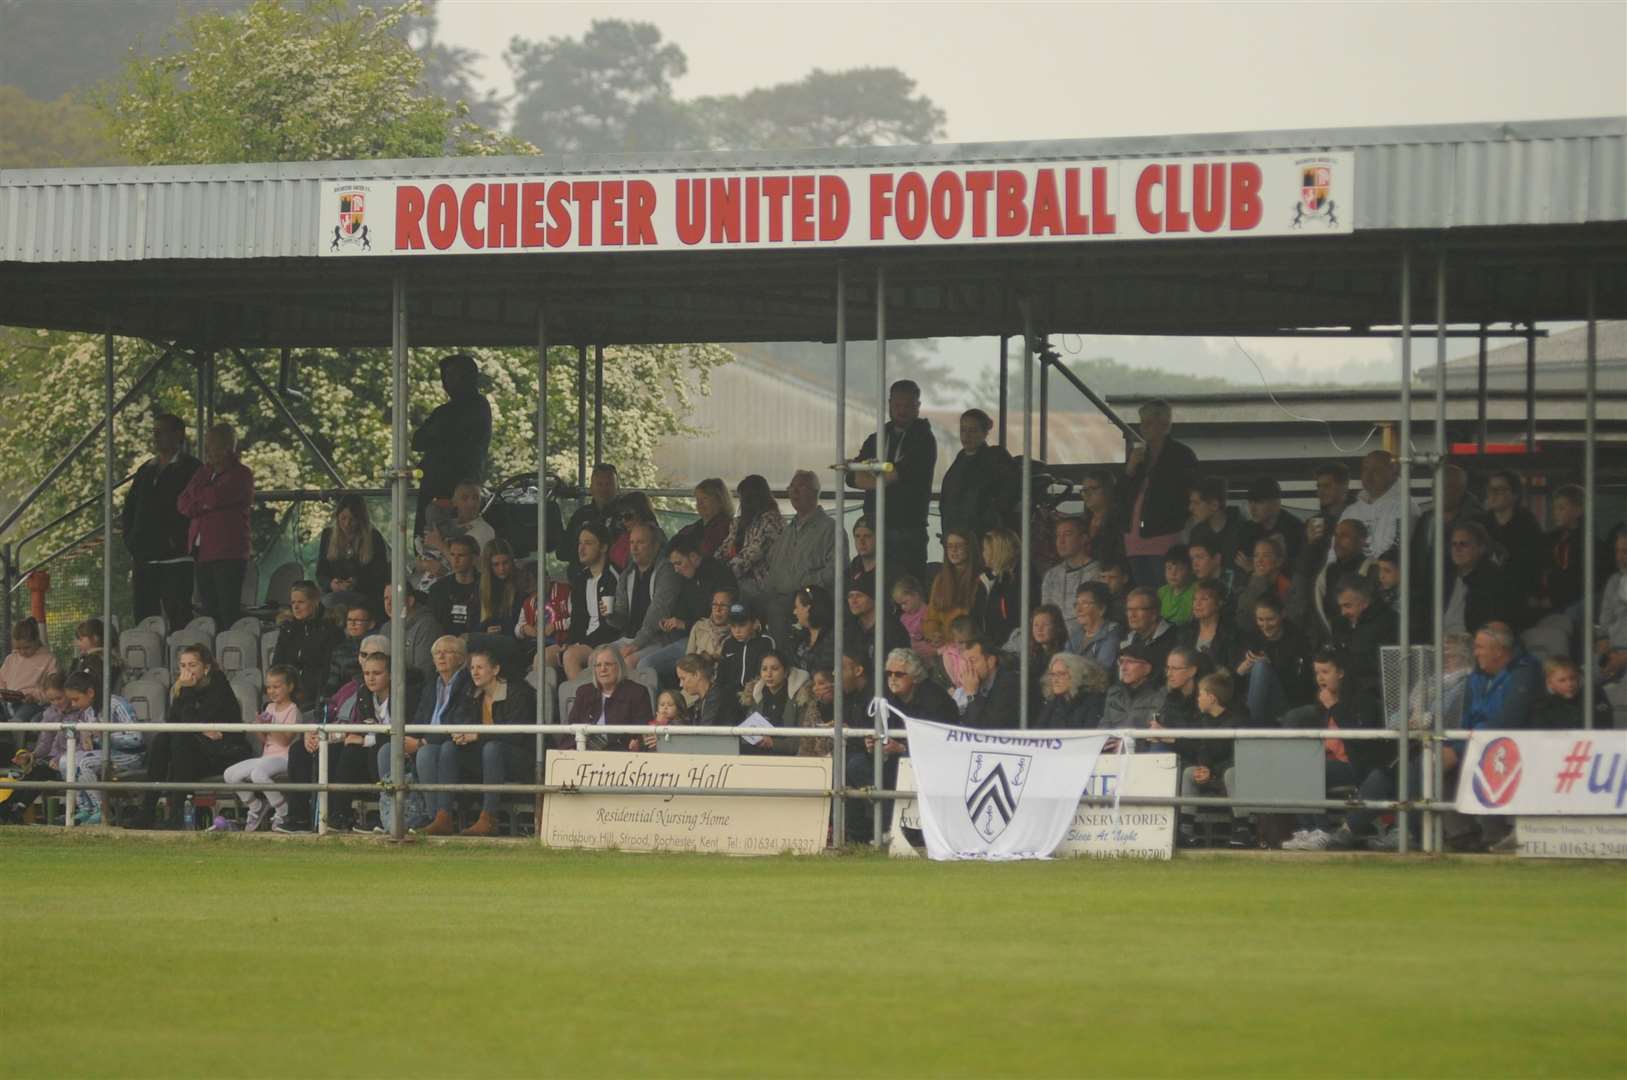 NHS staff will get free access to Rochester United's home games next season